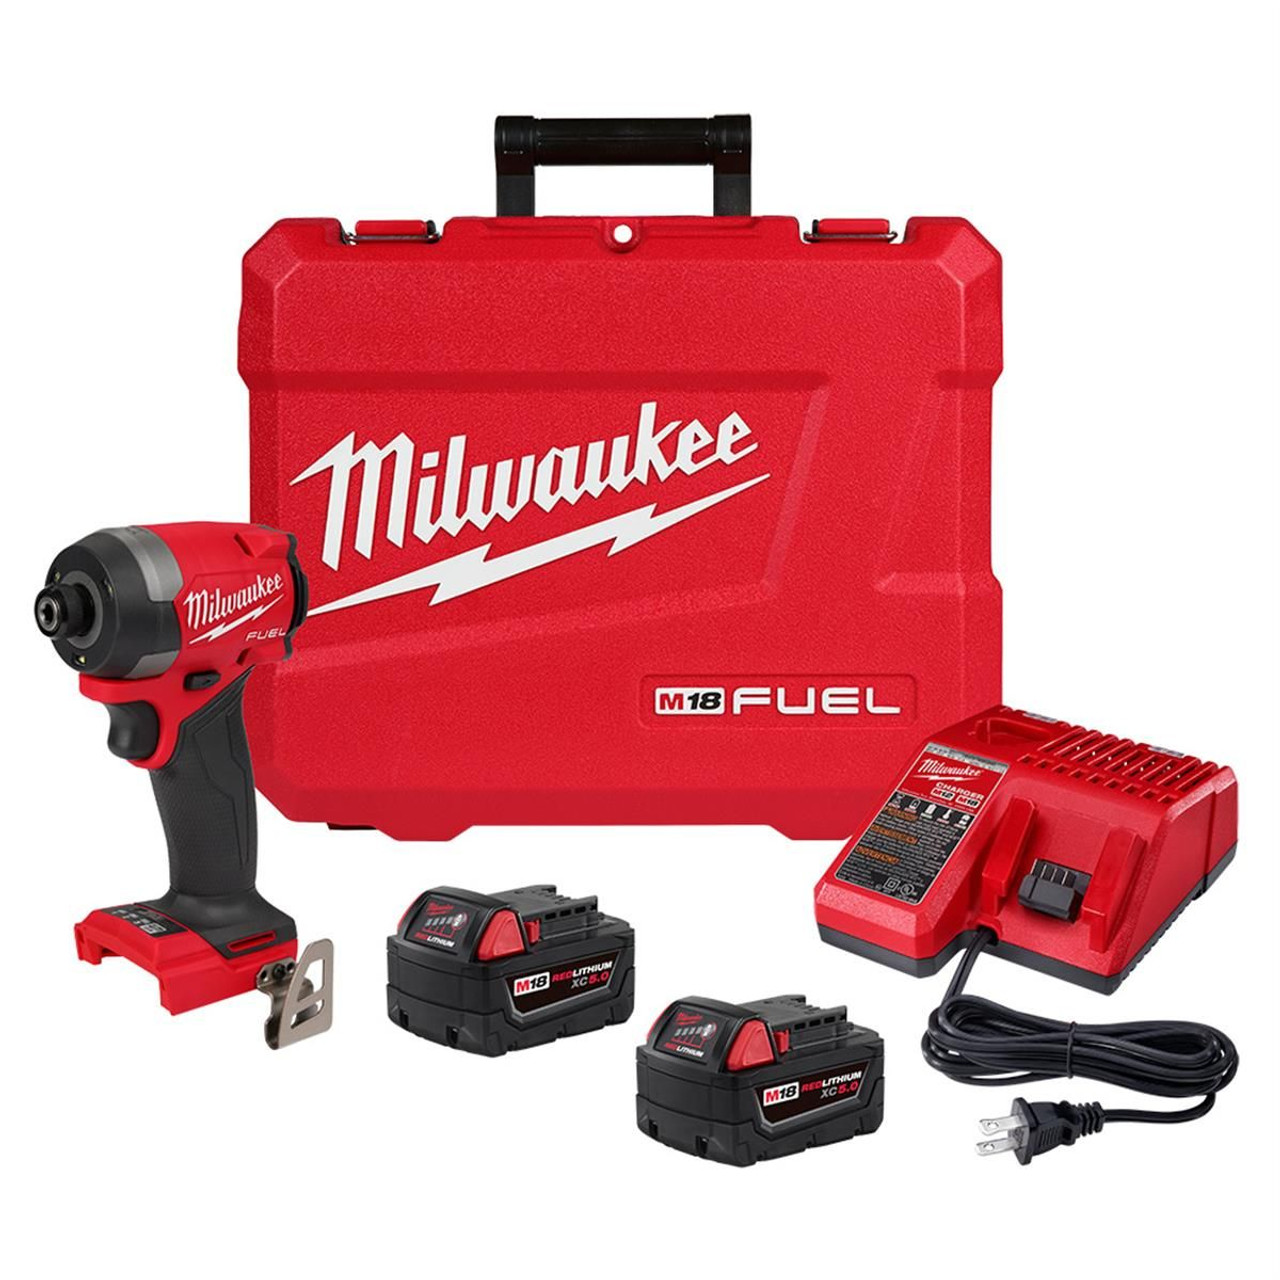 MLW2953-22  M18 FUEL™ 1/4" Hex Impact Driver Kit